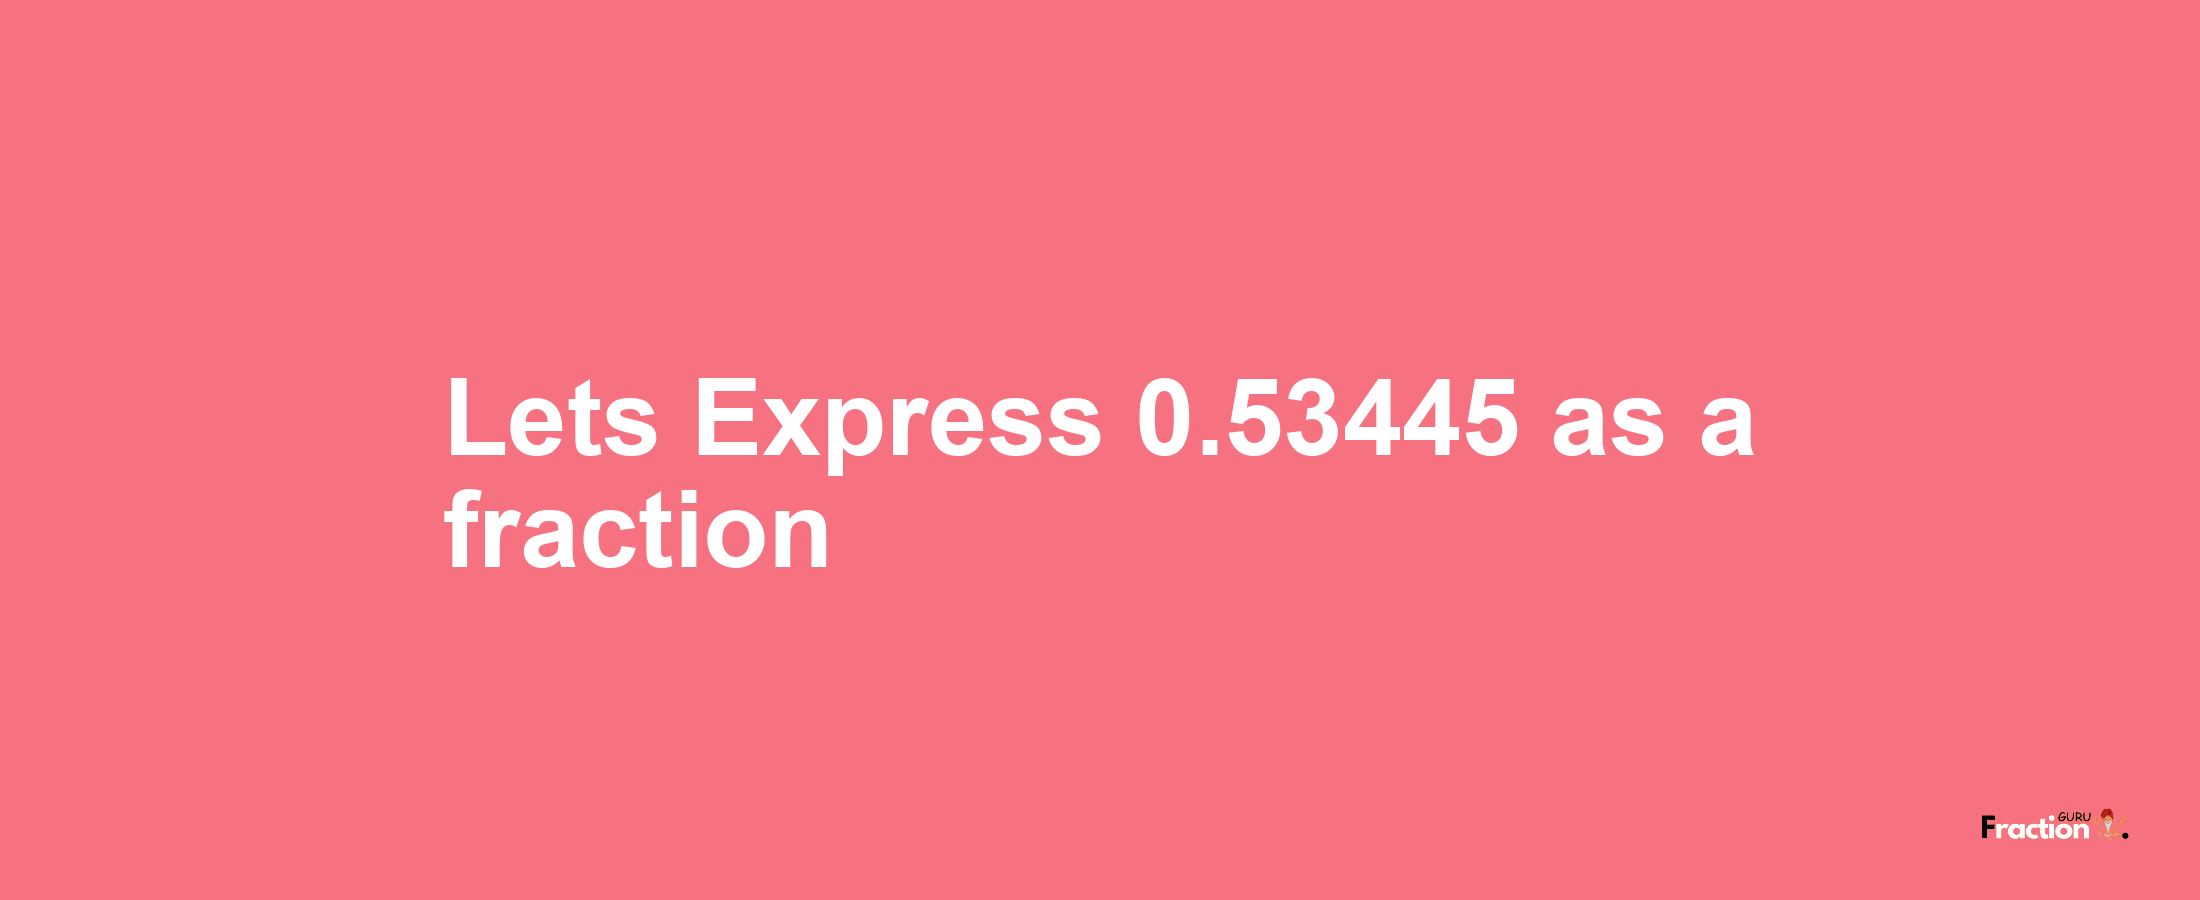 Lets Express 0.53445 as afraction